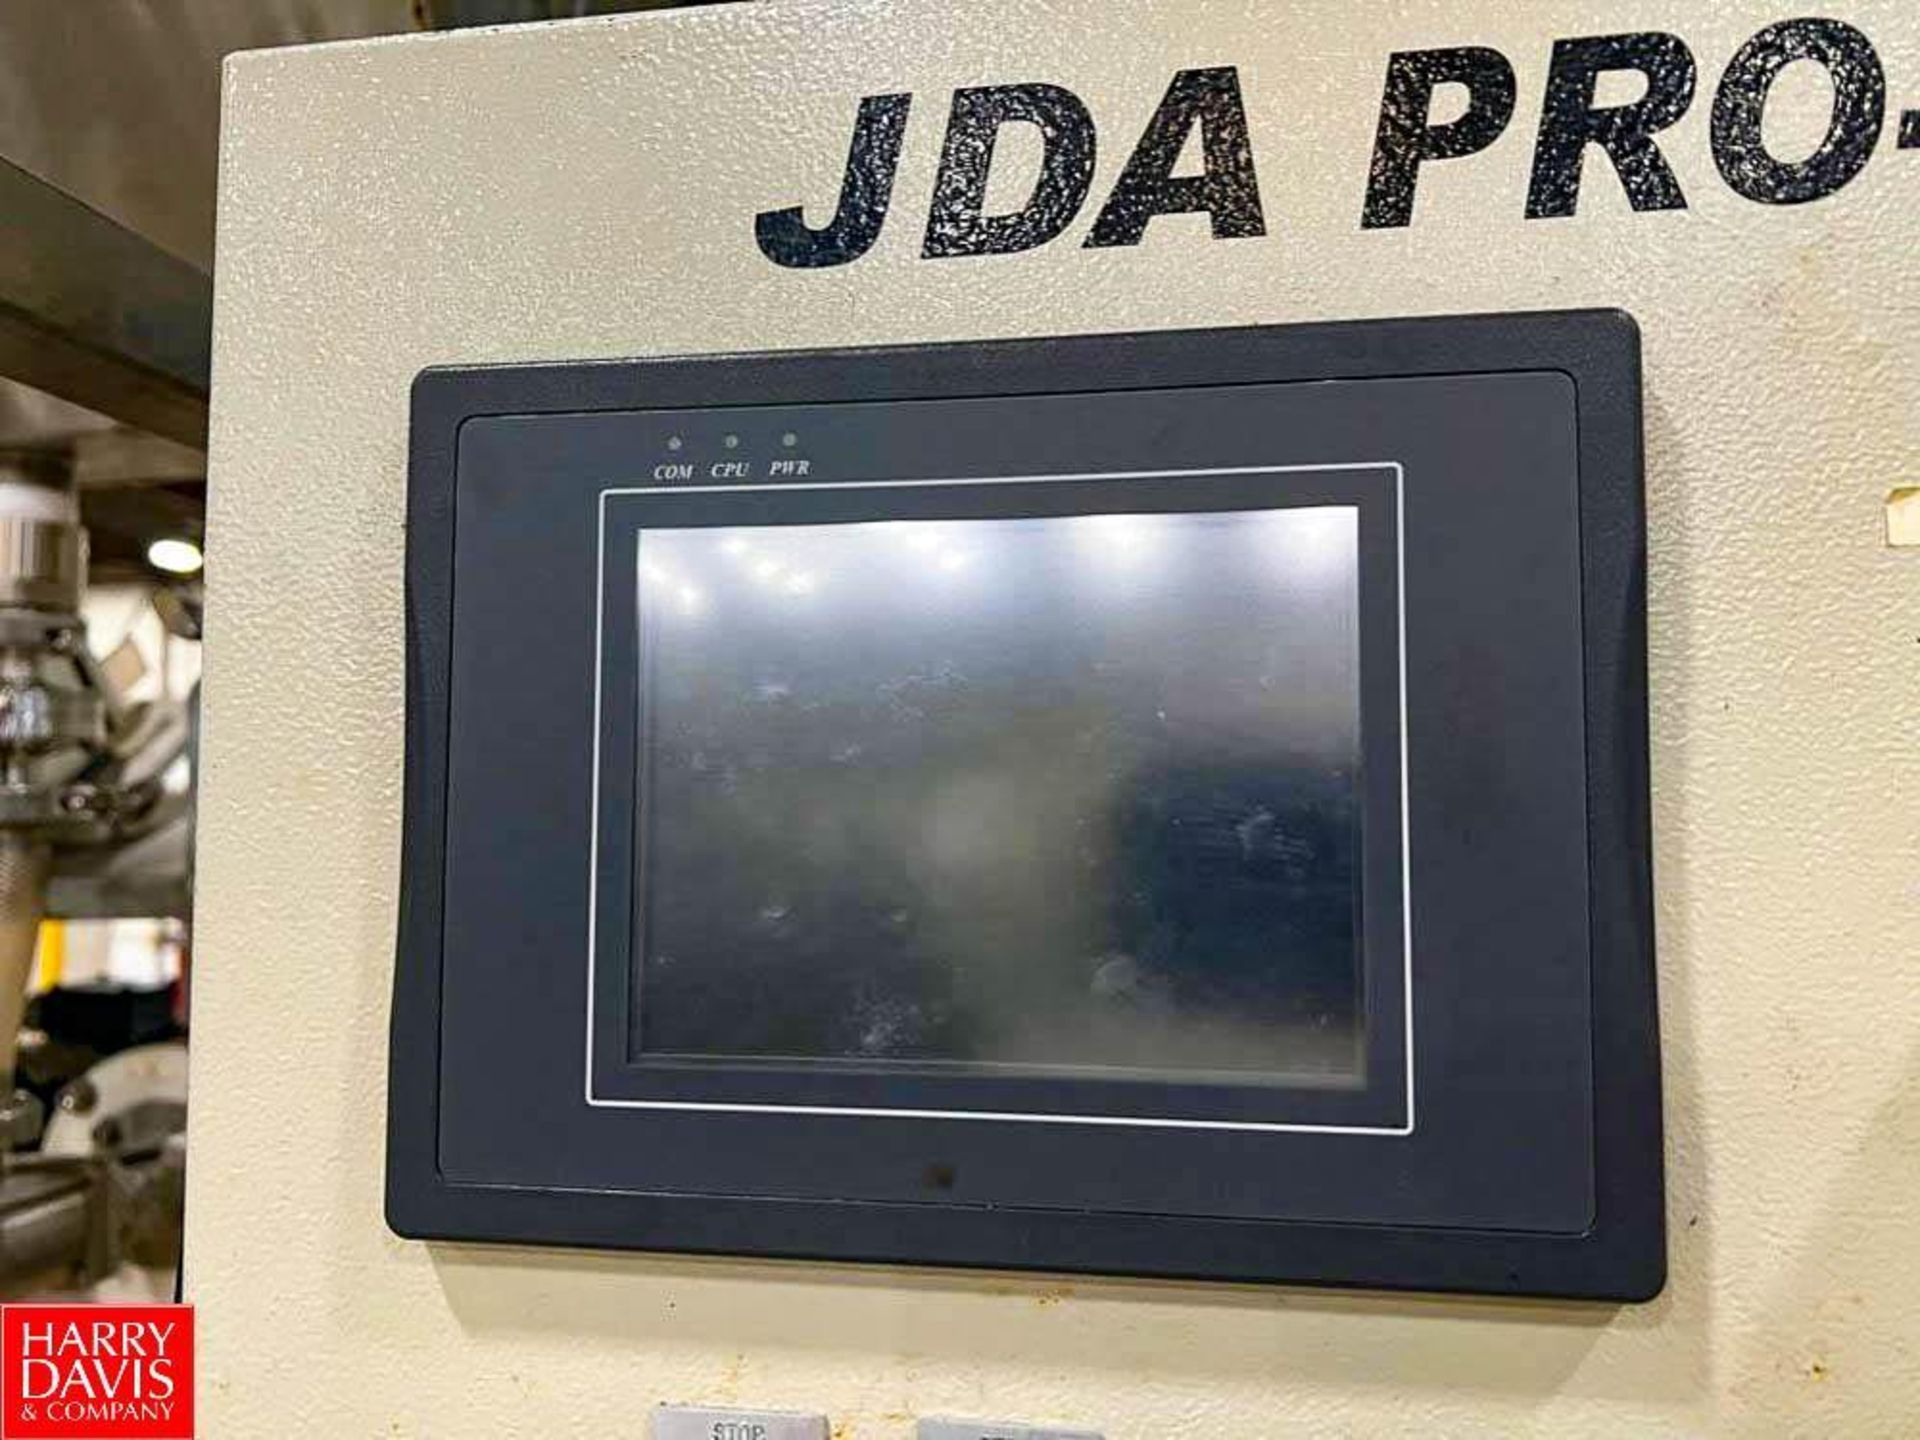 JDA Pro-Fill S/S 8-Valve Filler with Touch Screen HMI, Mitsubishi Melsec PLC with (2) FX2N-IHC High- - Image 3 of 5